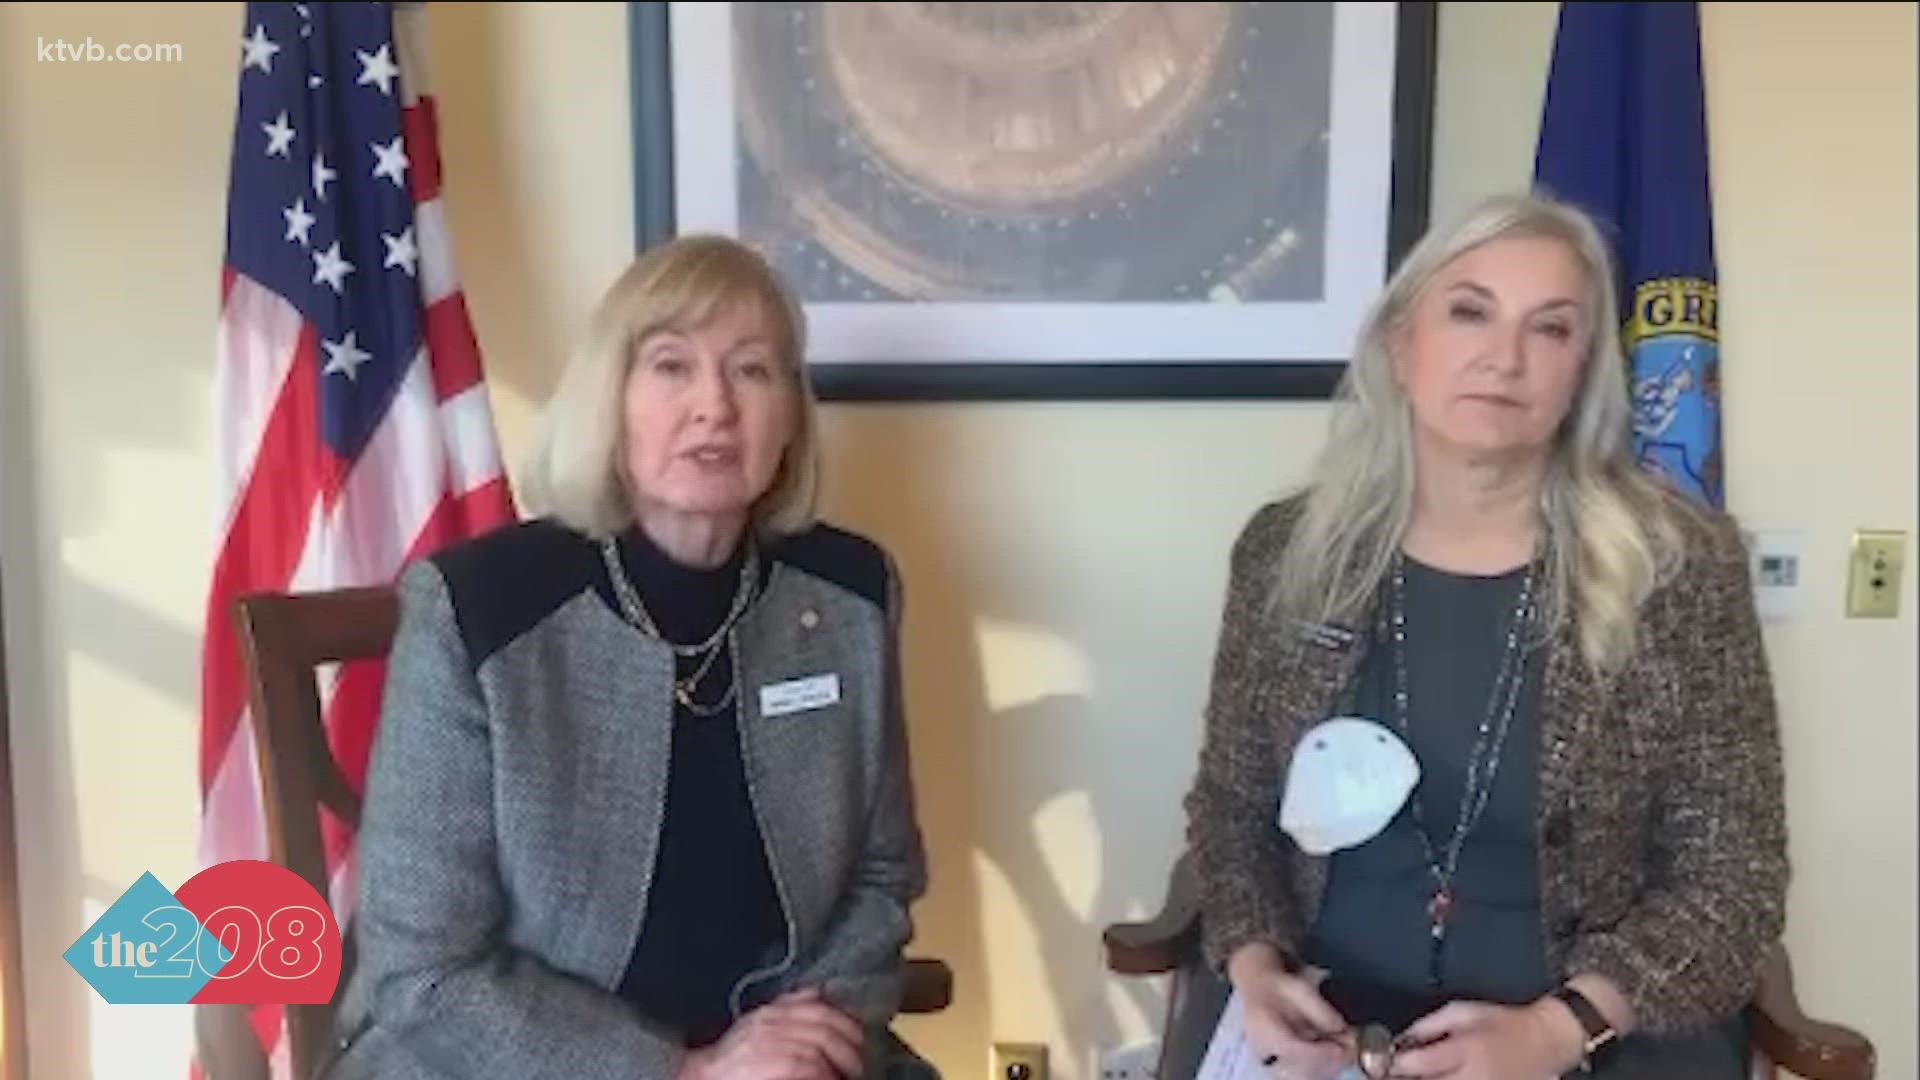 Sen. Mary Souza, R-Coeur d’Alene, is co-sponsoring the bill with Rep. Caroline Nilsson Troy, R-Genesee.